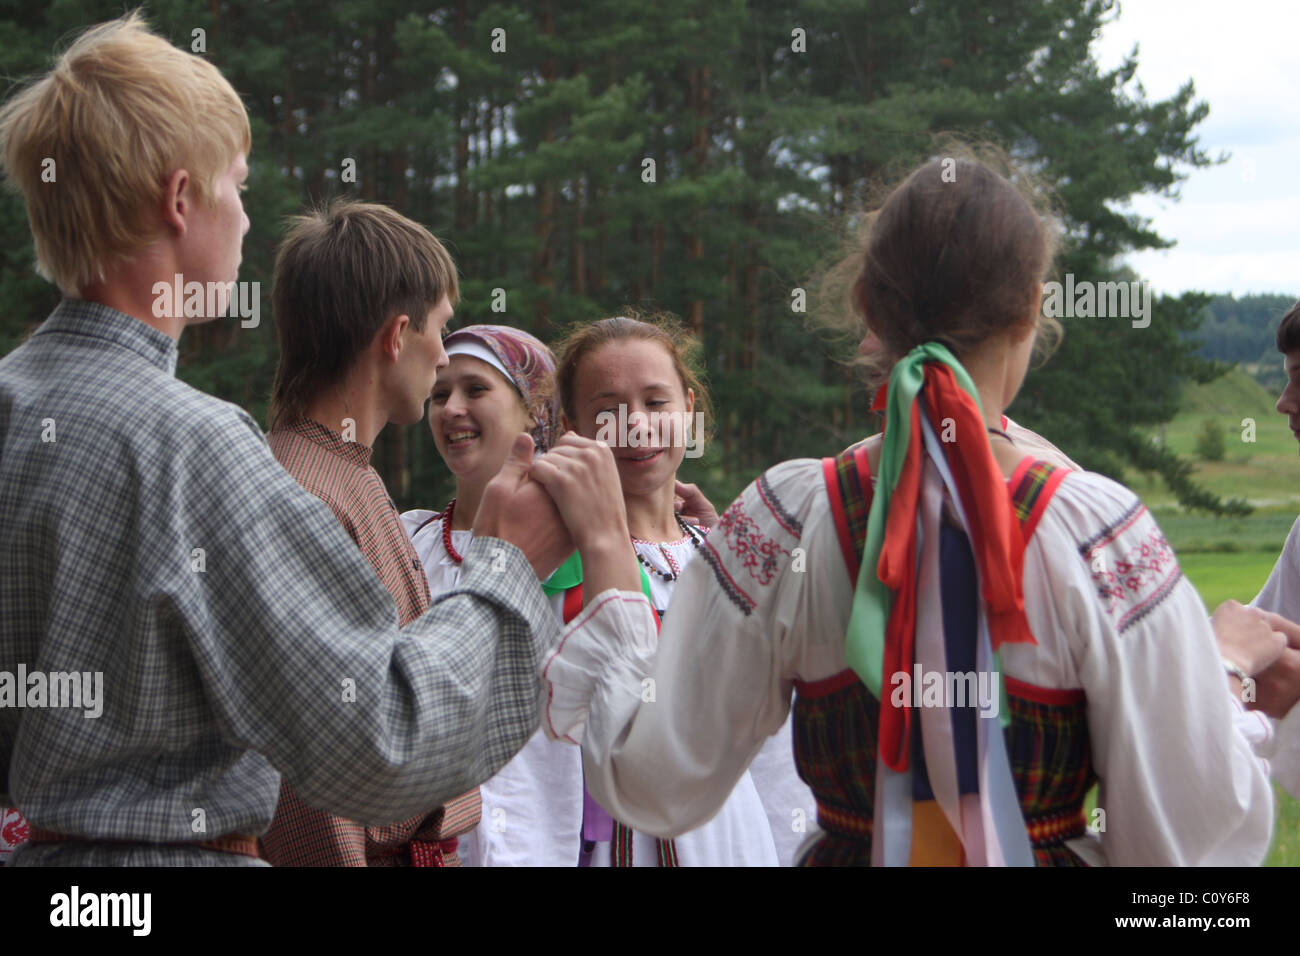 Girls and boys dance round dance at folklore festival Stock Photo